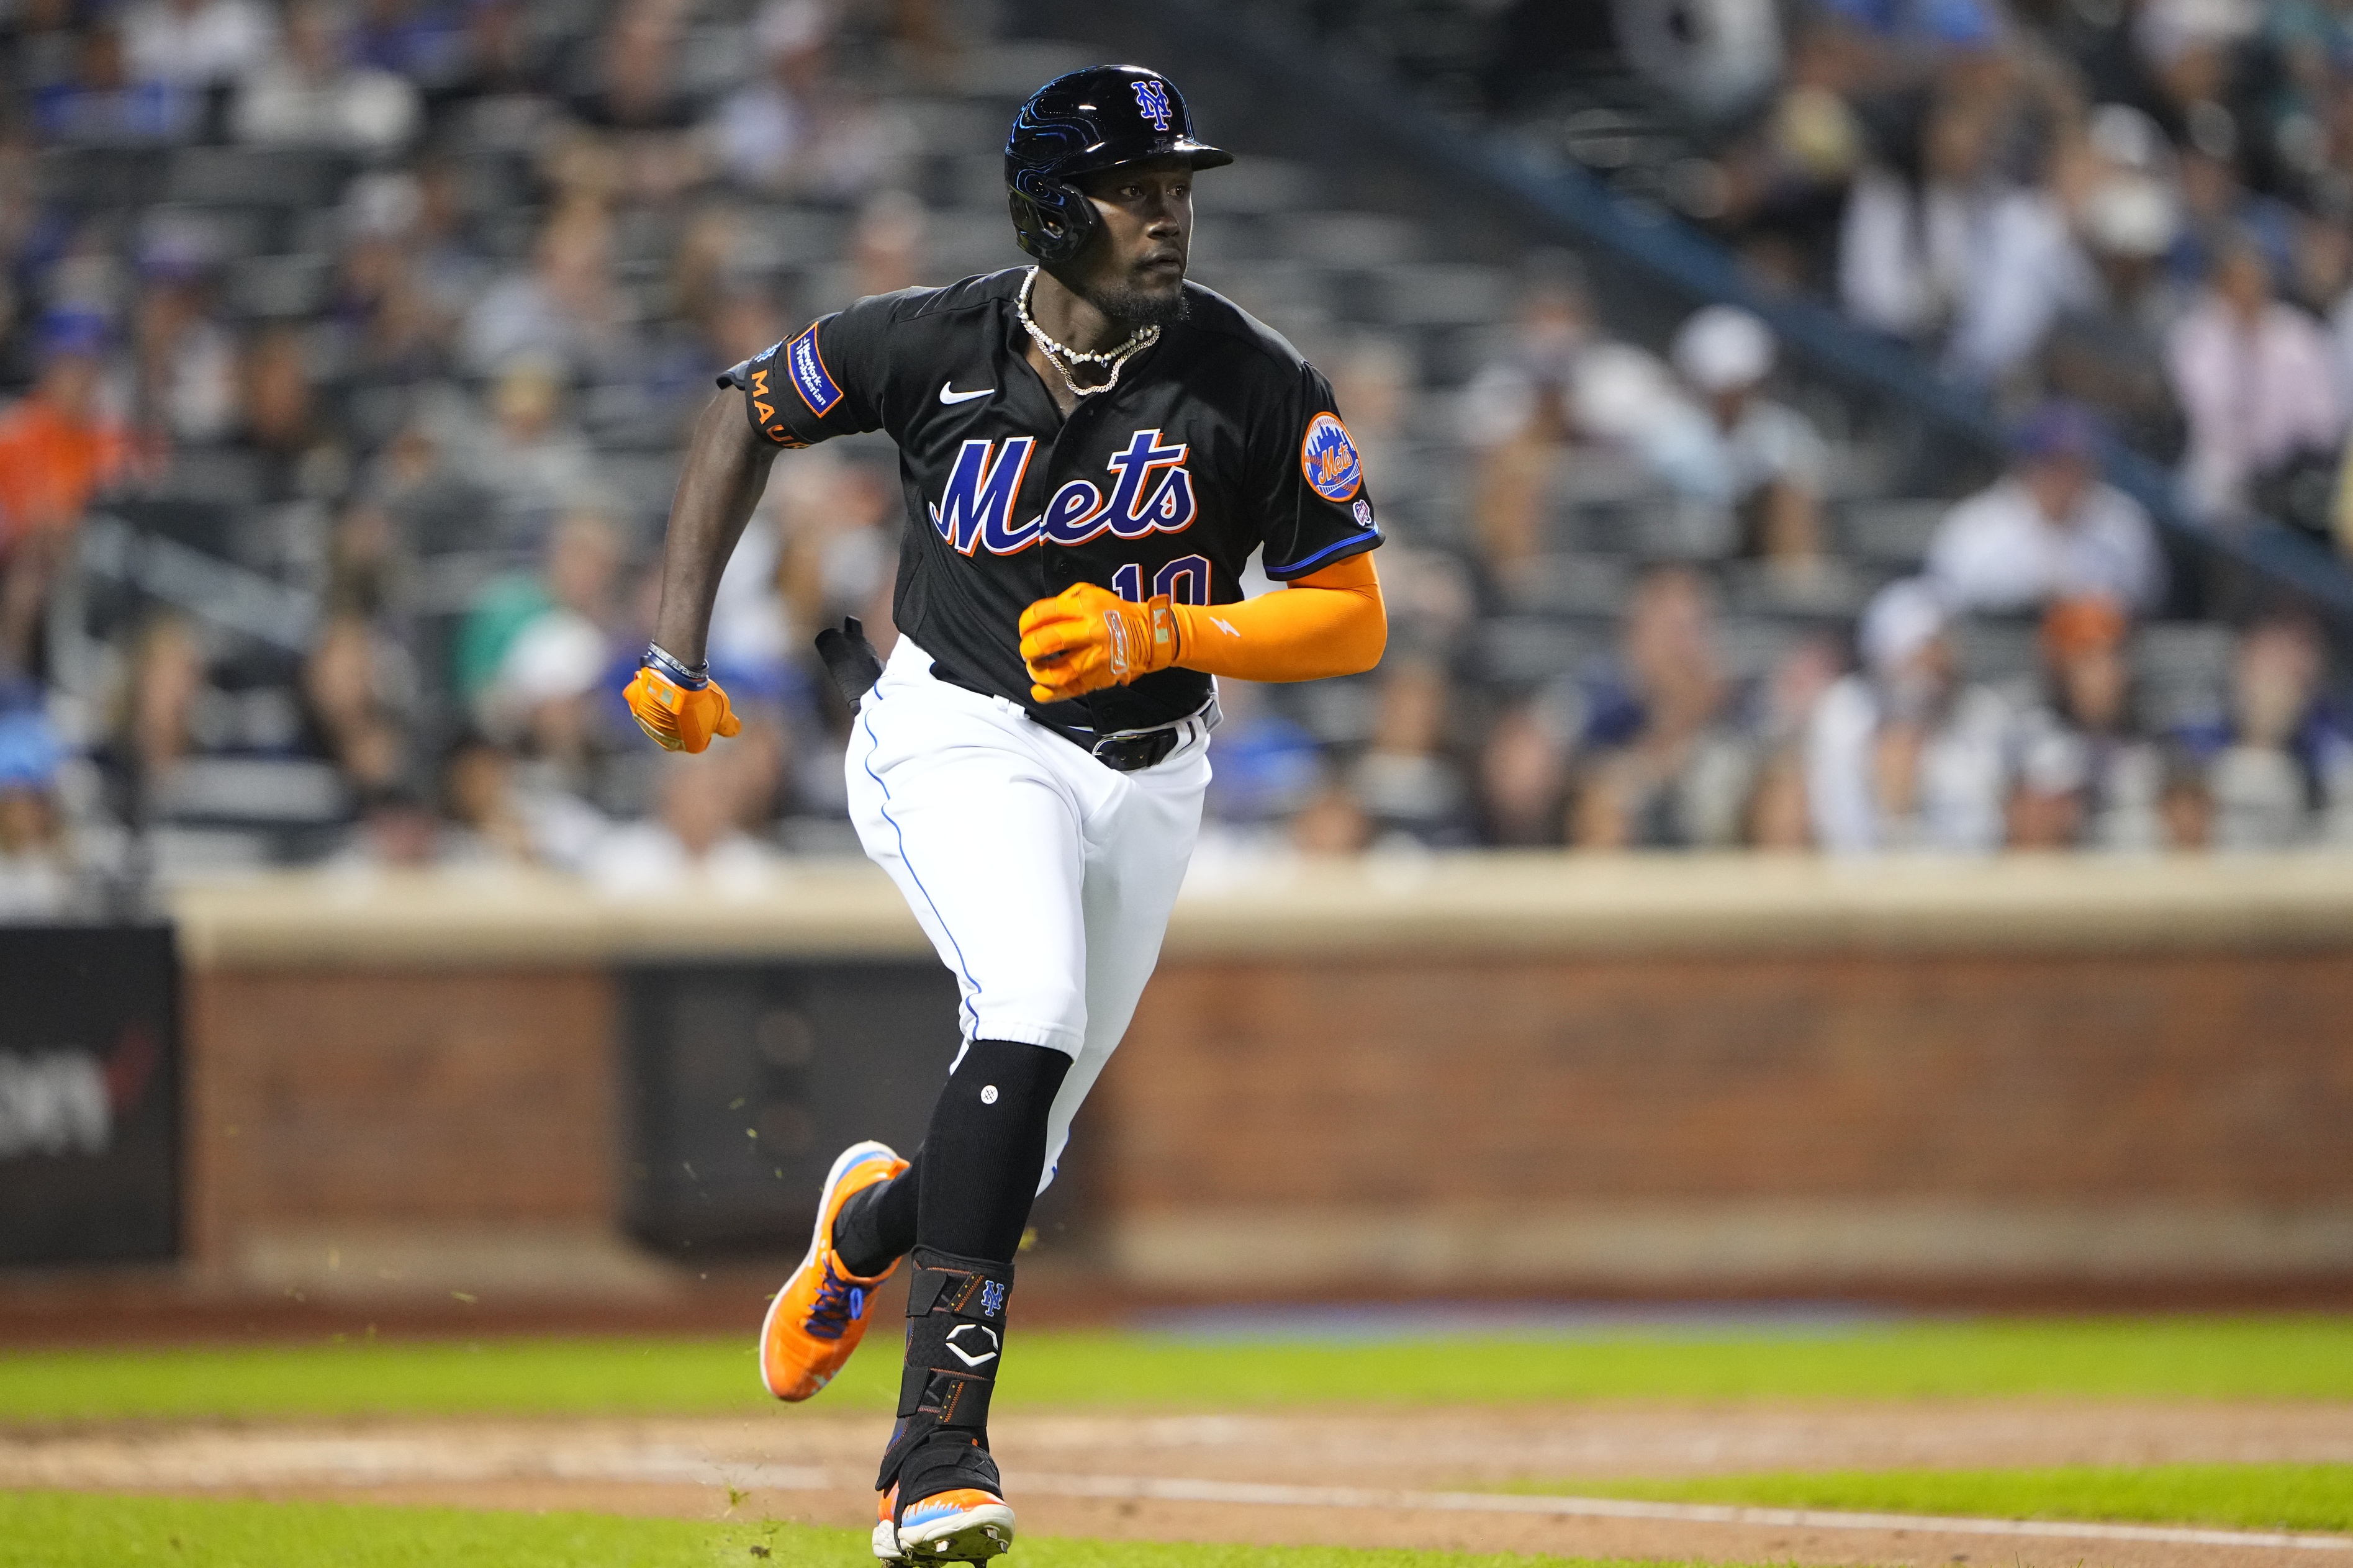 Mets' Ronny Mauricio reflects on 'great' first MLB series, earns